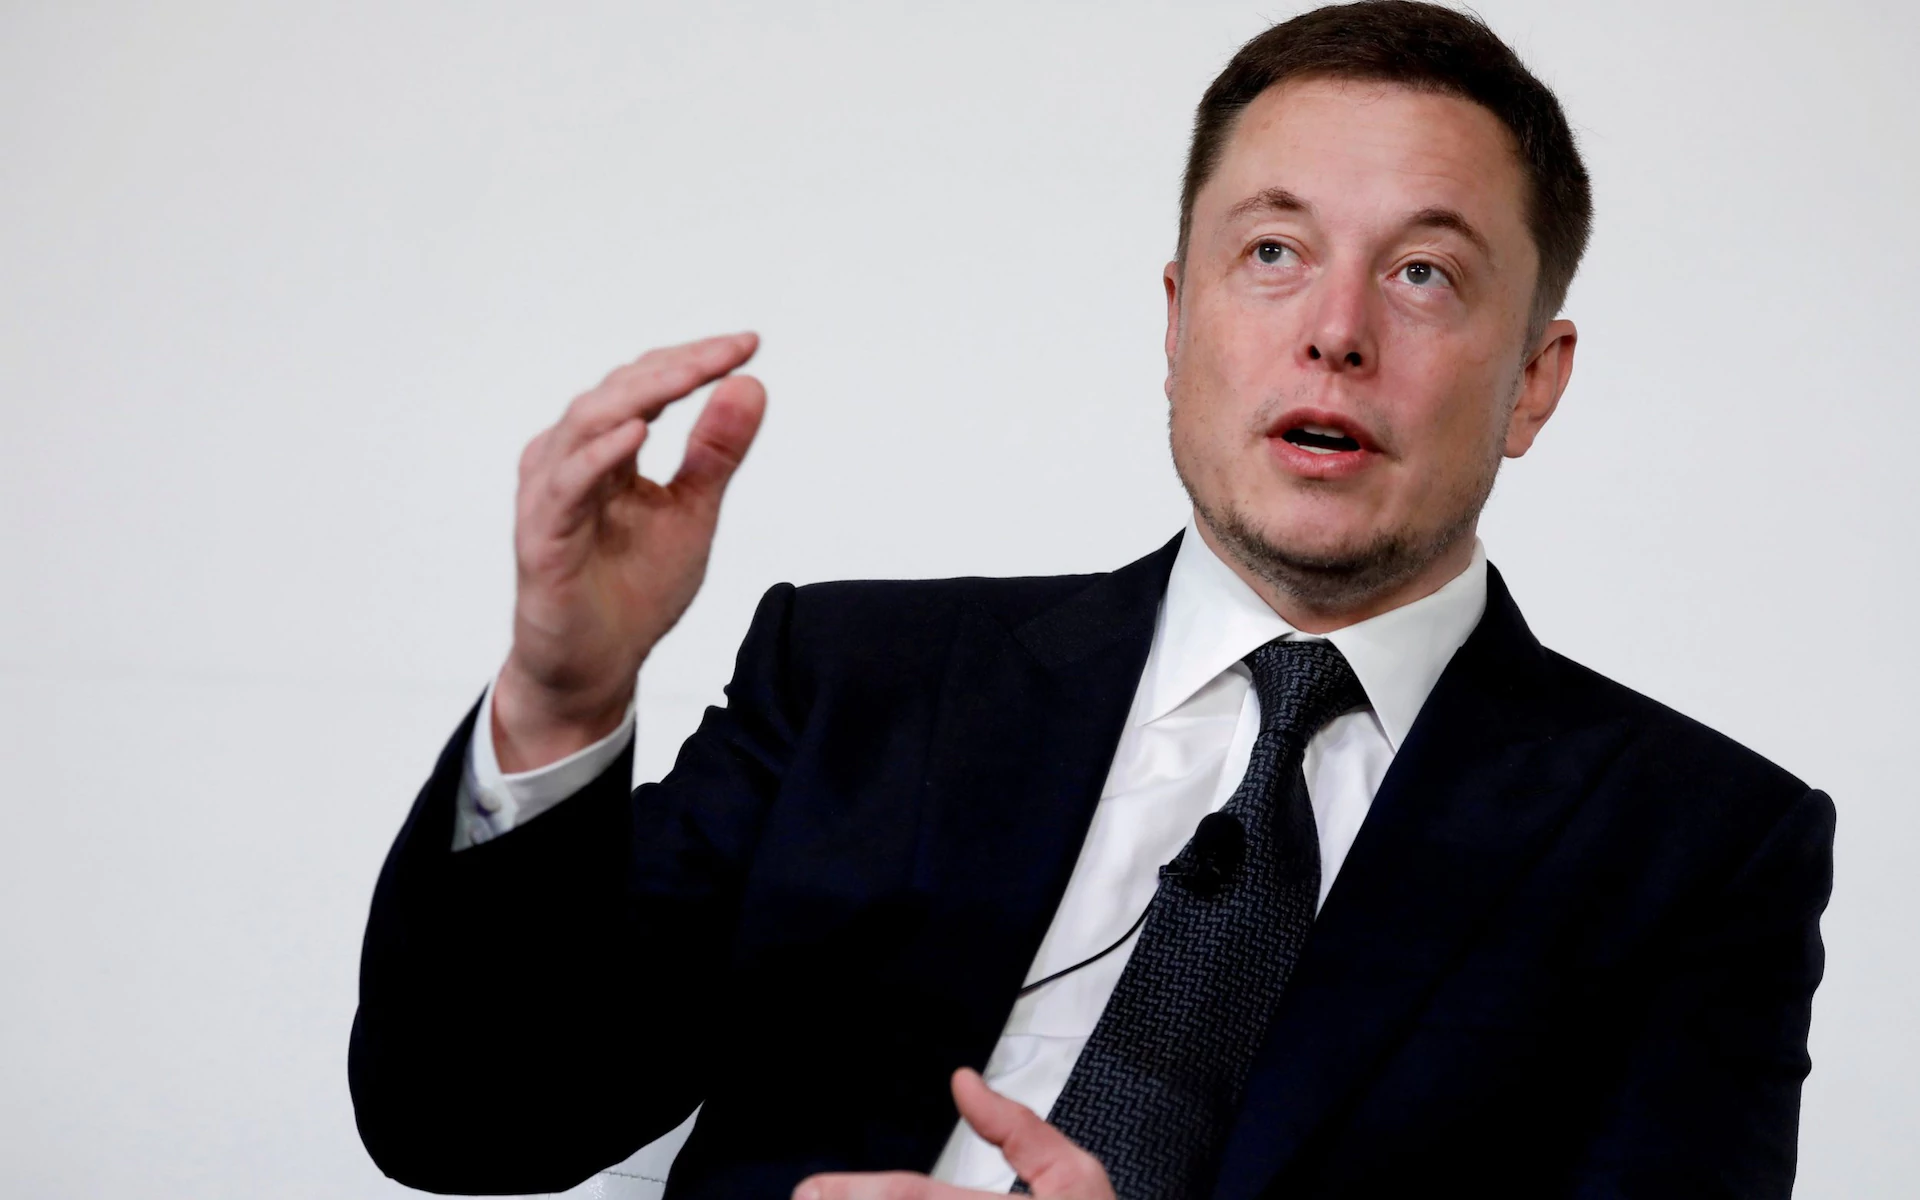 Elon Musk, the entrepreneur behind Tesla and Space X, has a solar power proposal for PR